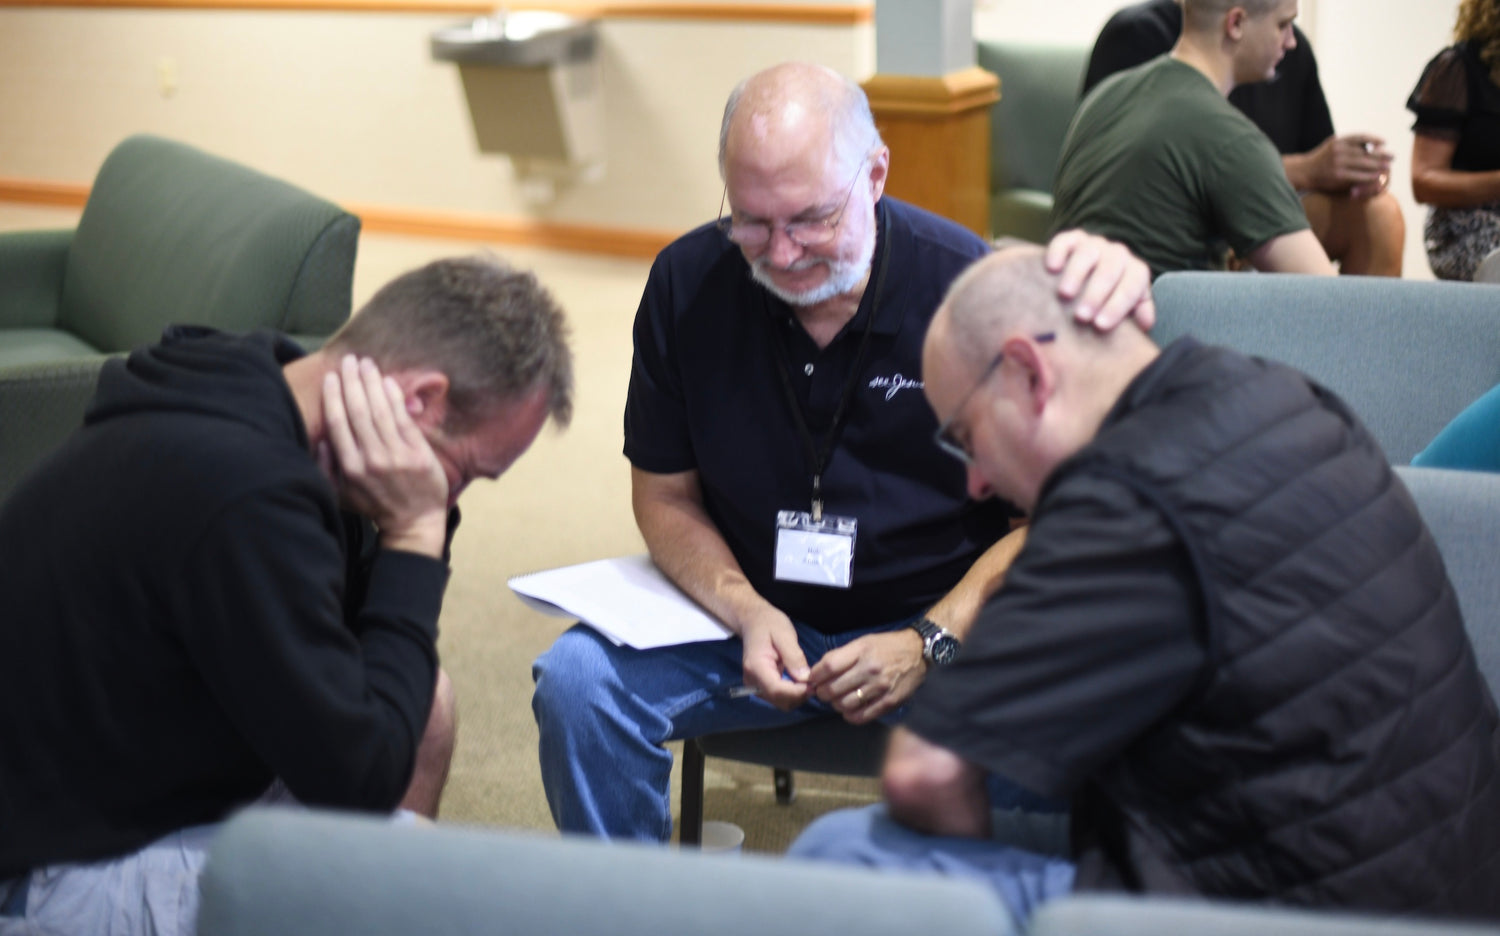 A Praying Life Launches Pastor Cohorts: From L'Abri to a Video Conference Call